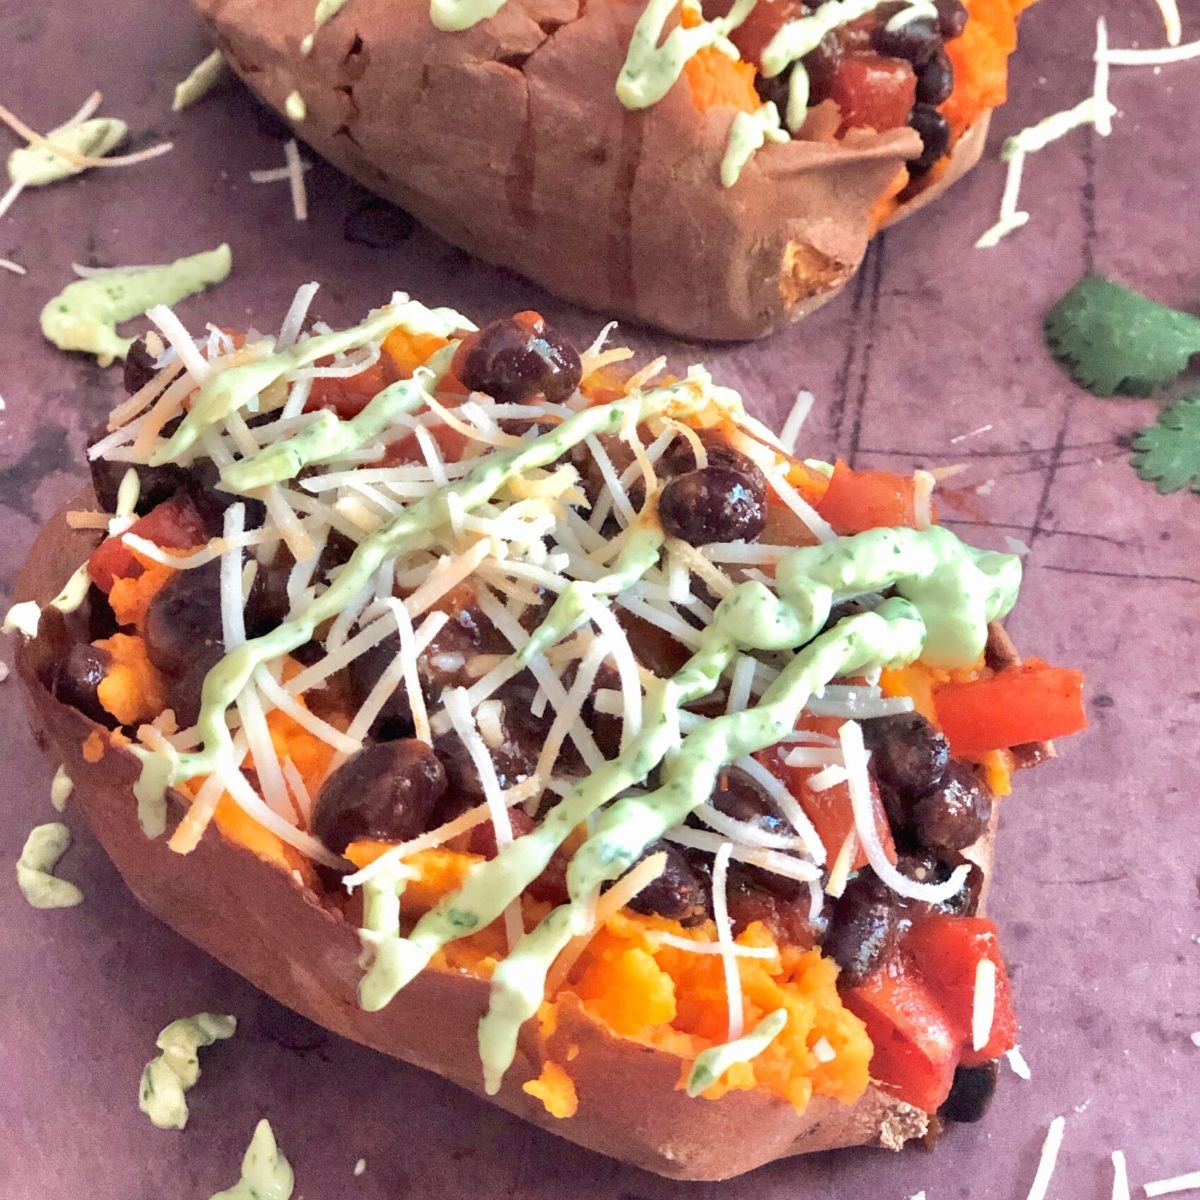 two sweet potatoes stuffed with black beans, salsa, cheese, and avocado sauce.